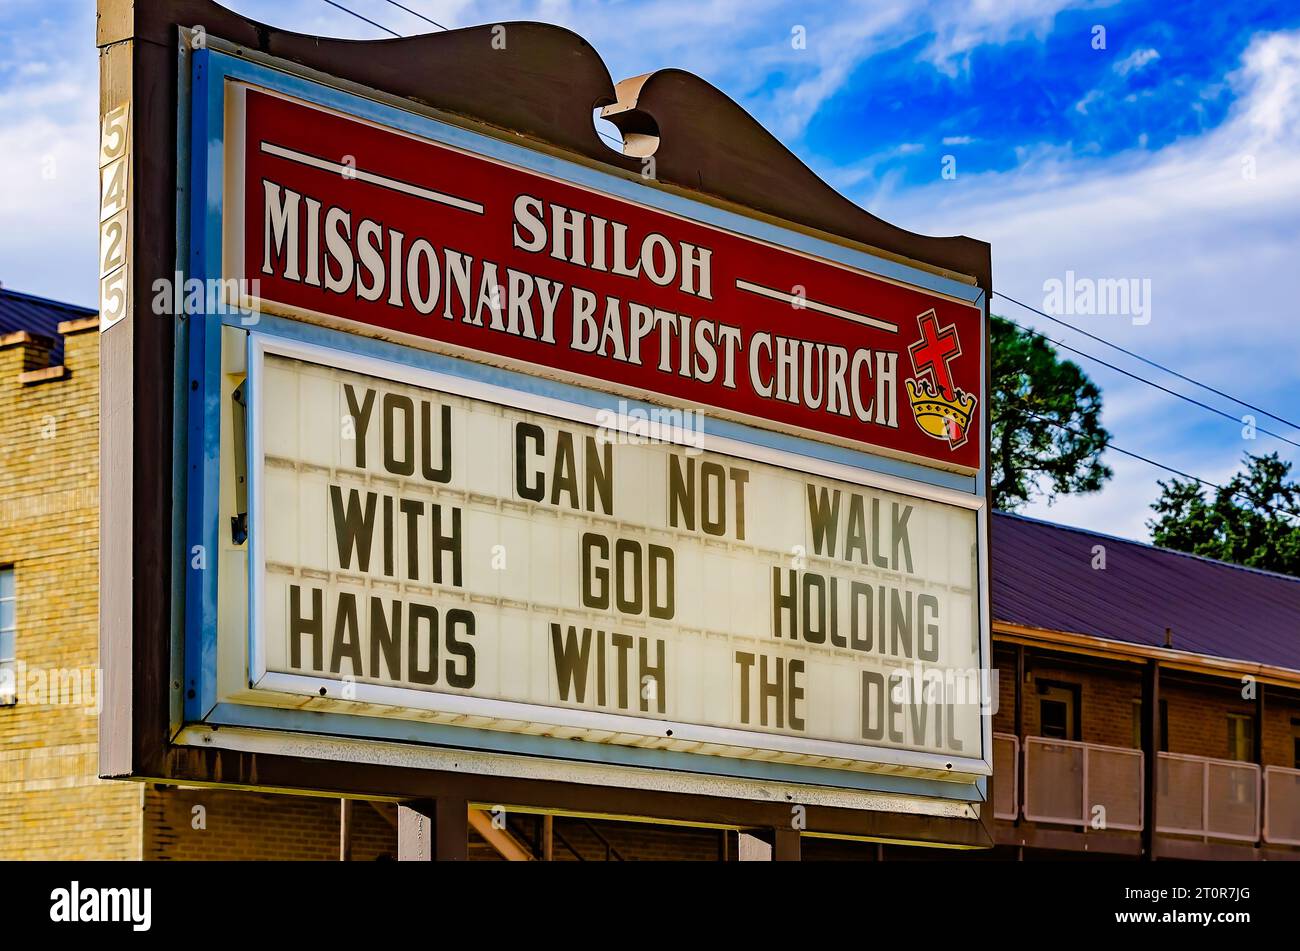 Shiloh Missionary Baptist Church displays a message about walking with God on its church sign, Oct. 7, 2023, in Moss Point, Mississippi. Stock Photo